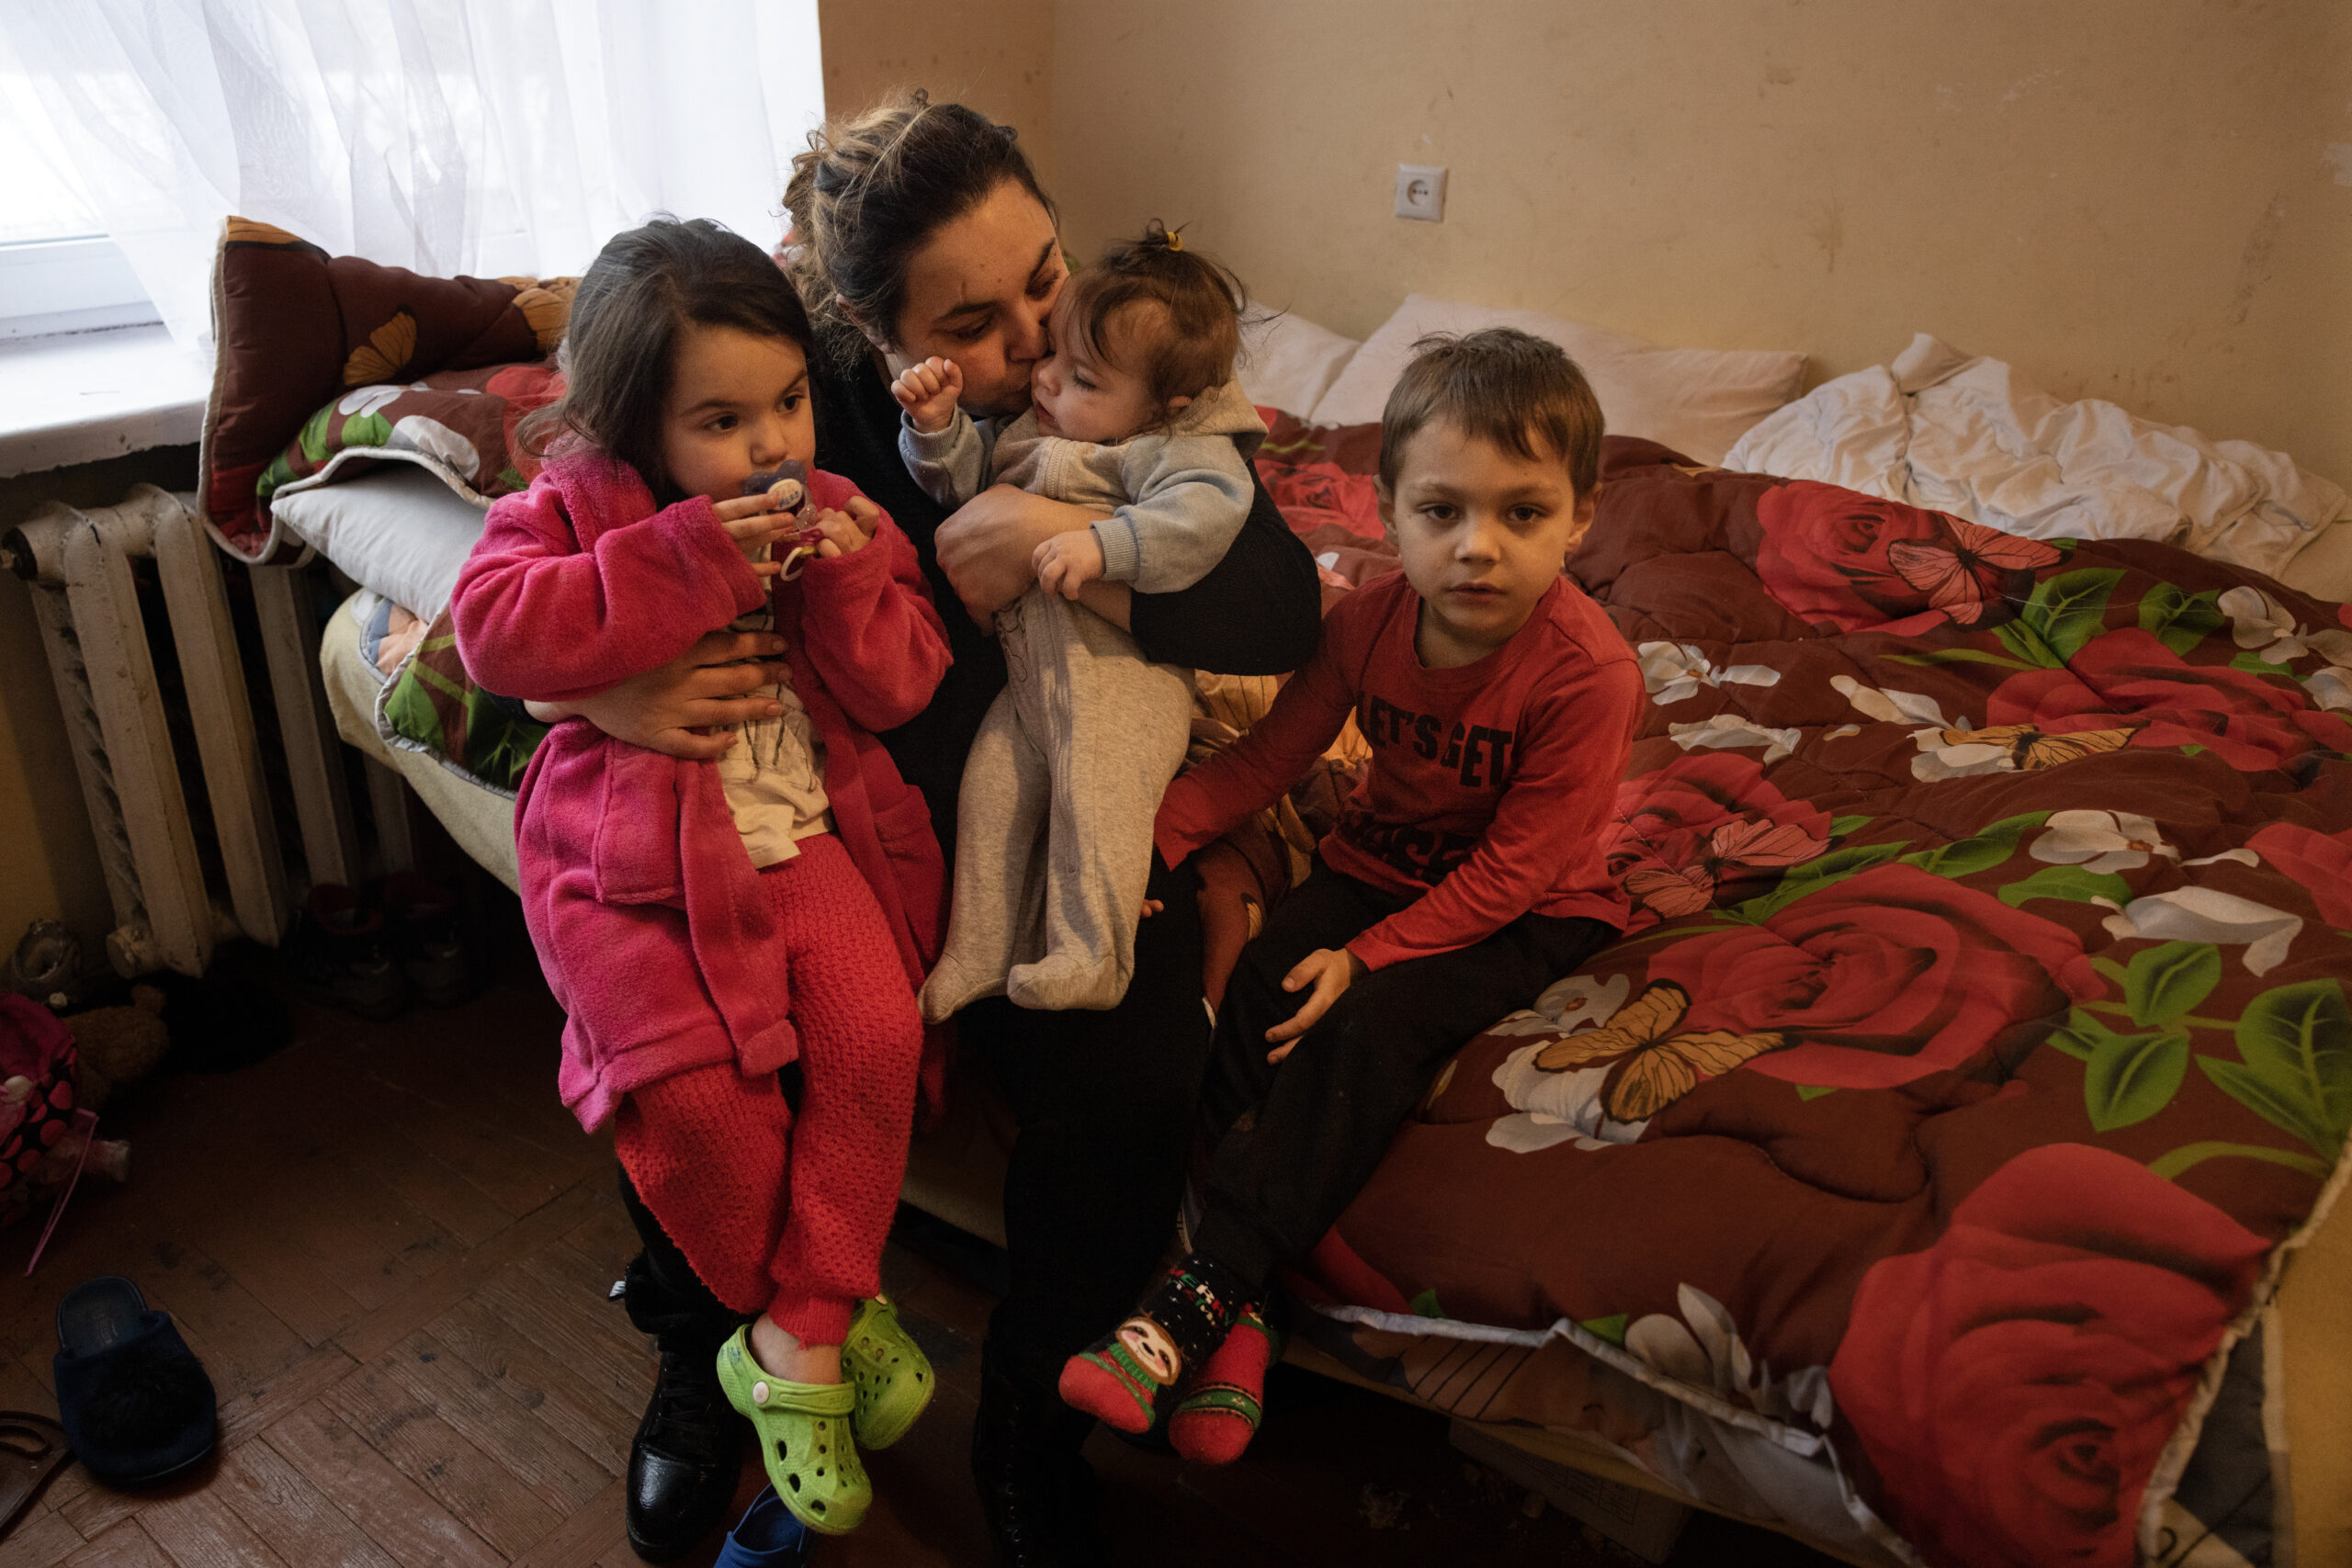 LVIV,UKRAINE - Olena, a mother from Mariupol, Ukraine, holds her children Veronica, 3, Renat, 5, and baby Boghdan, 7 months, inside their small room in a shelter where they have been living for several months after fleeing their now-destroyed city. Olena wishes to relocate to Poland, but she is unable to leave with her current partner as they are not married. Picture taken on February 11, 2023.